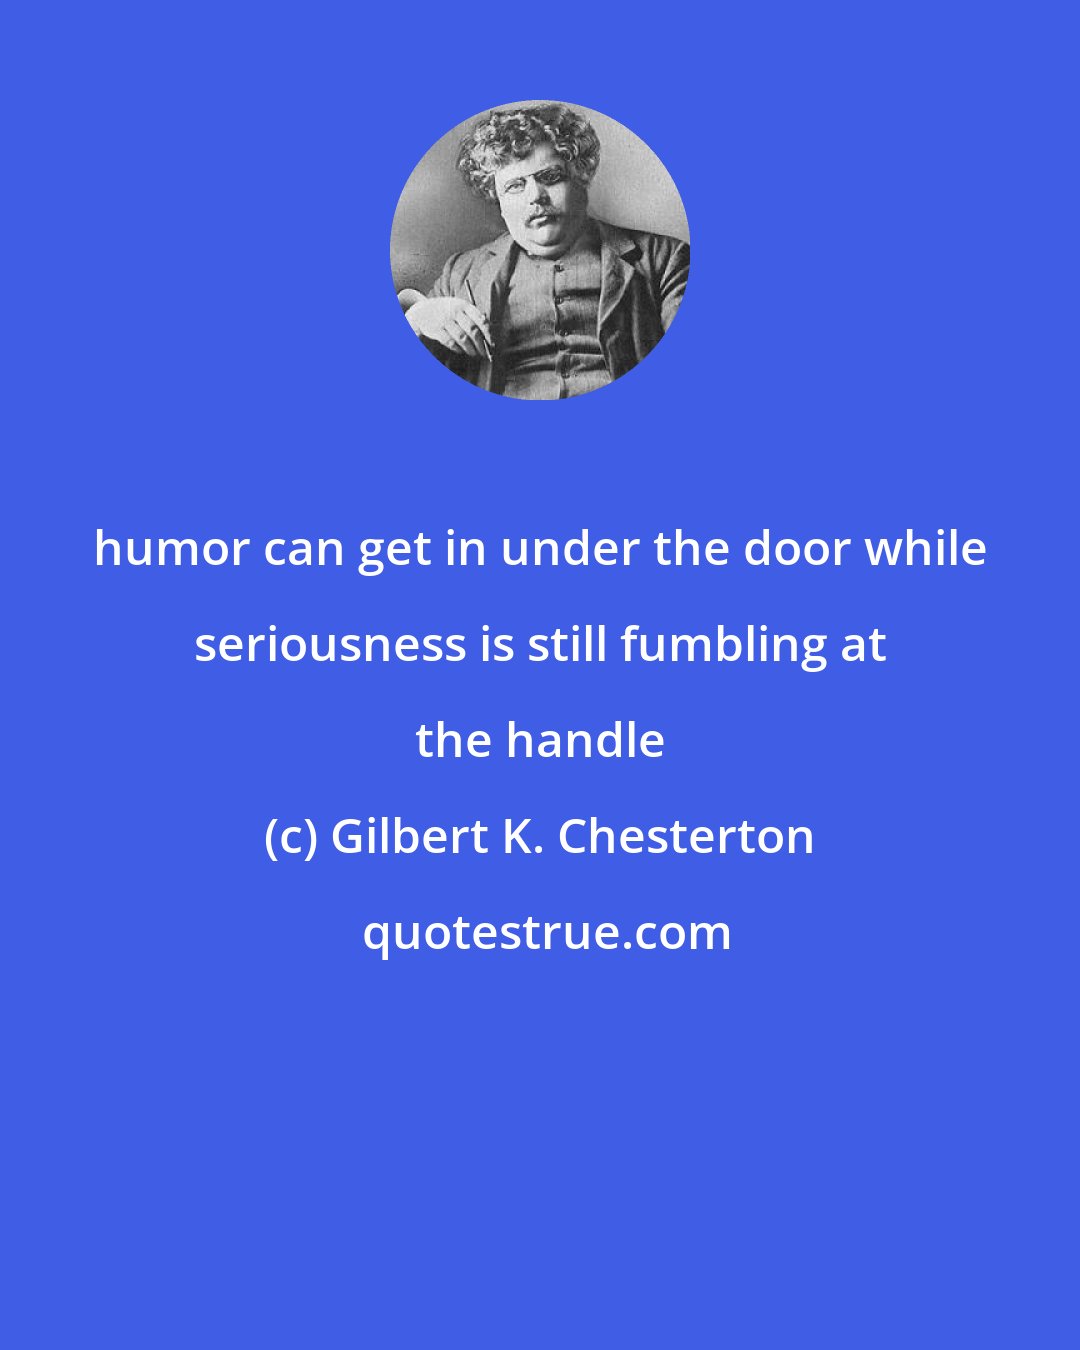 Gilbert K. Chesterton: humor can get in under the door while seriousness is still fumbling at the handle